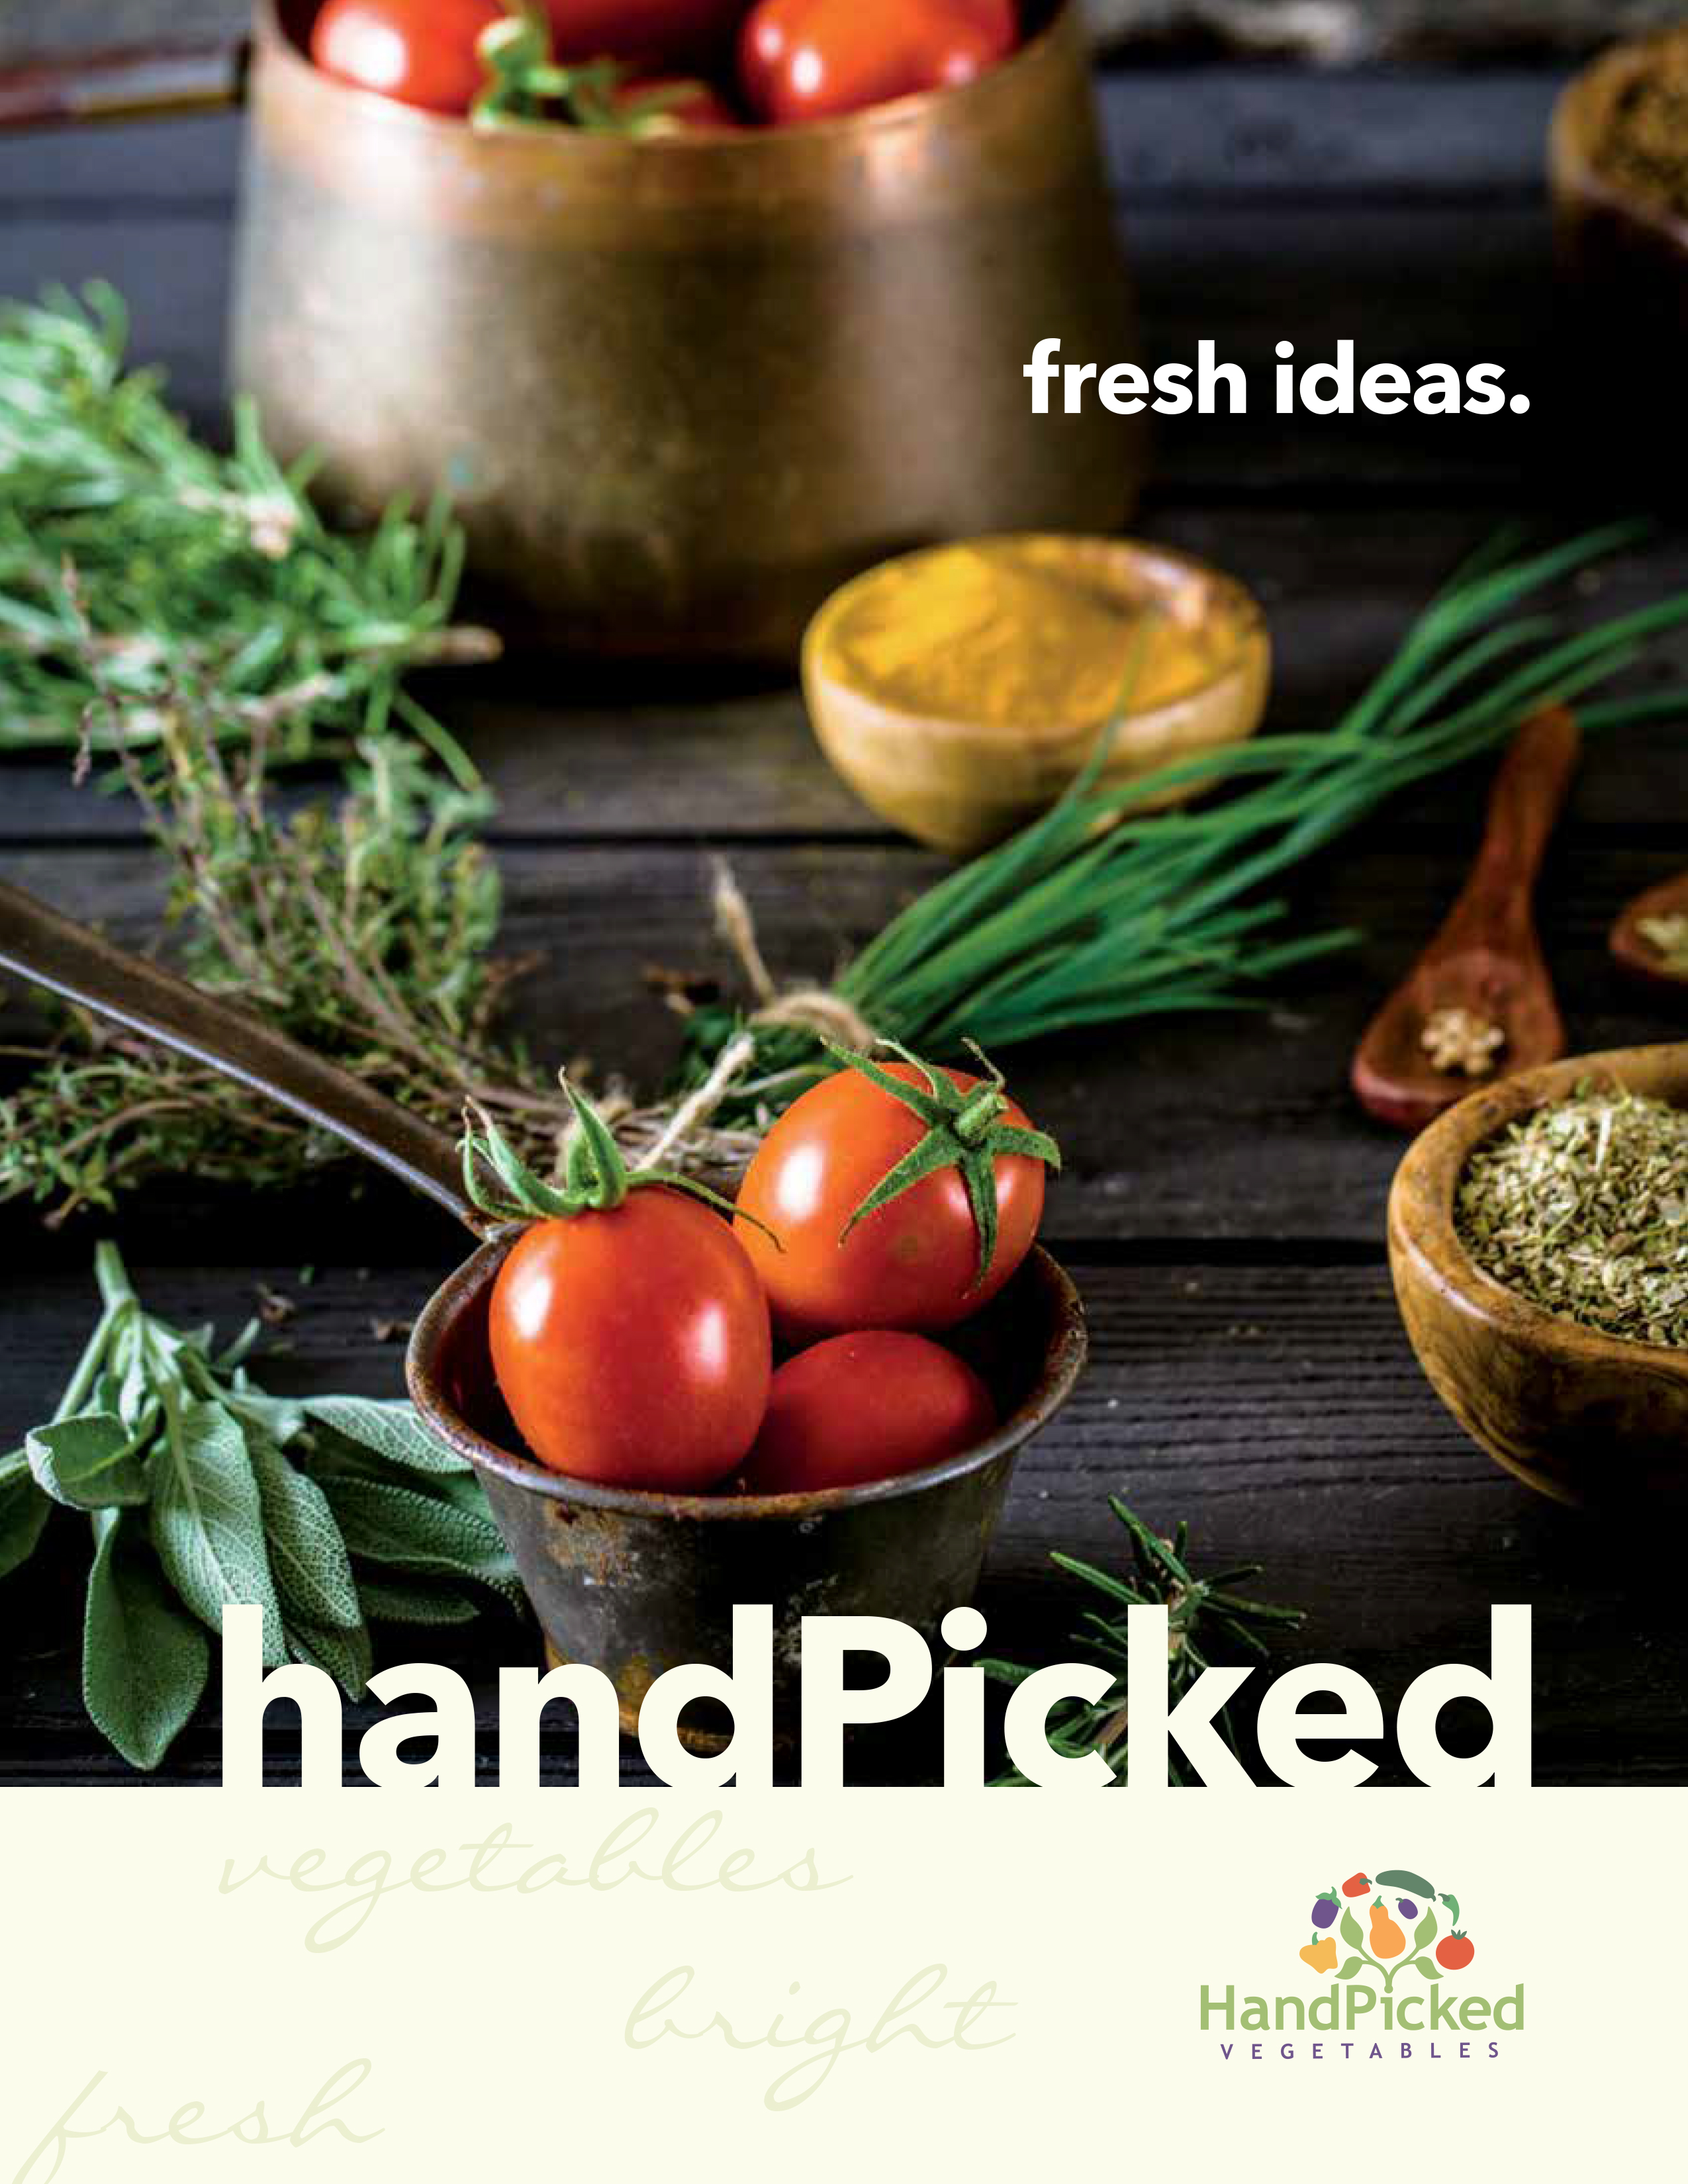 Cover for the Handpicked Vegetables brochure.